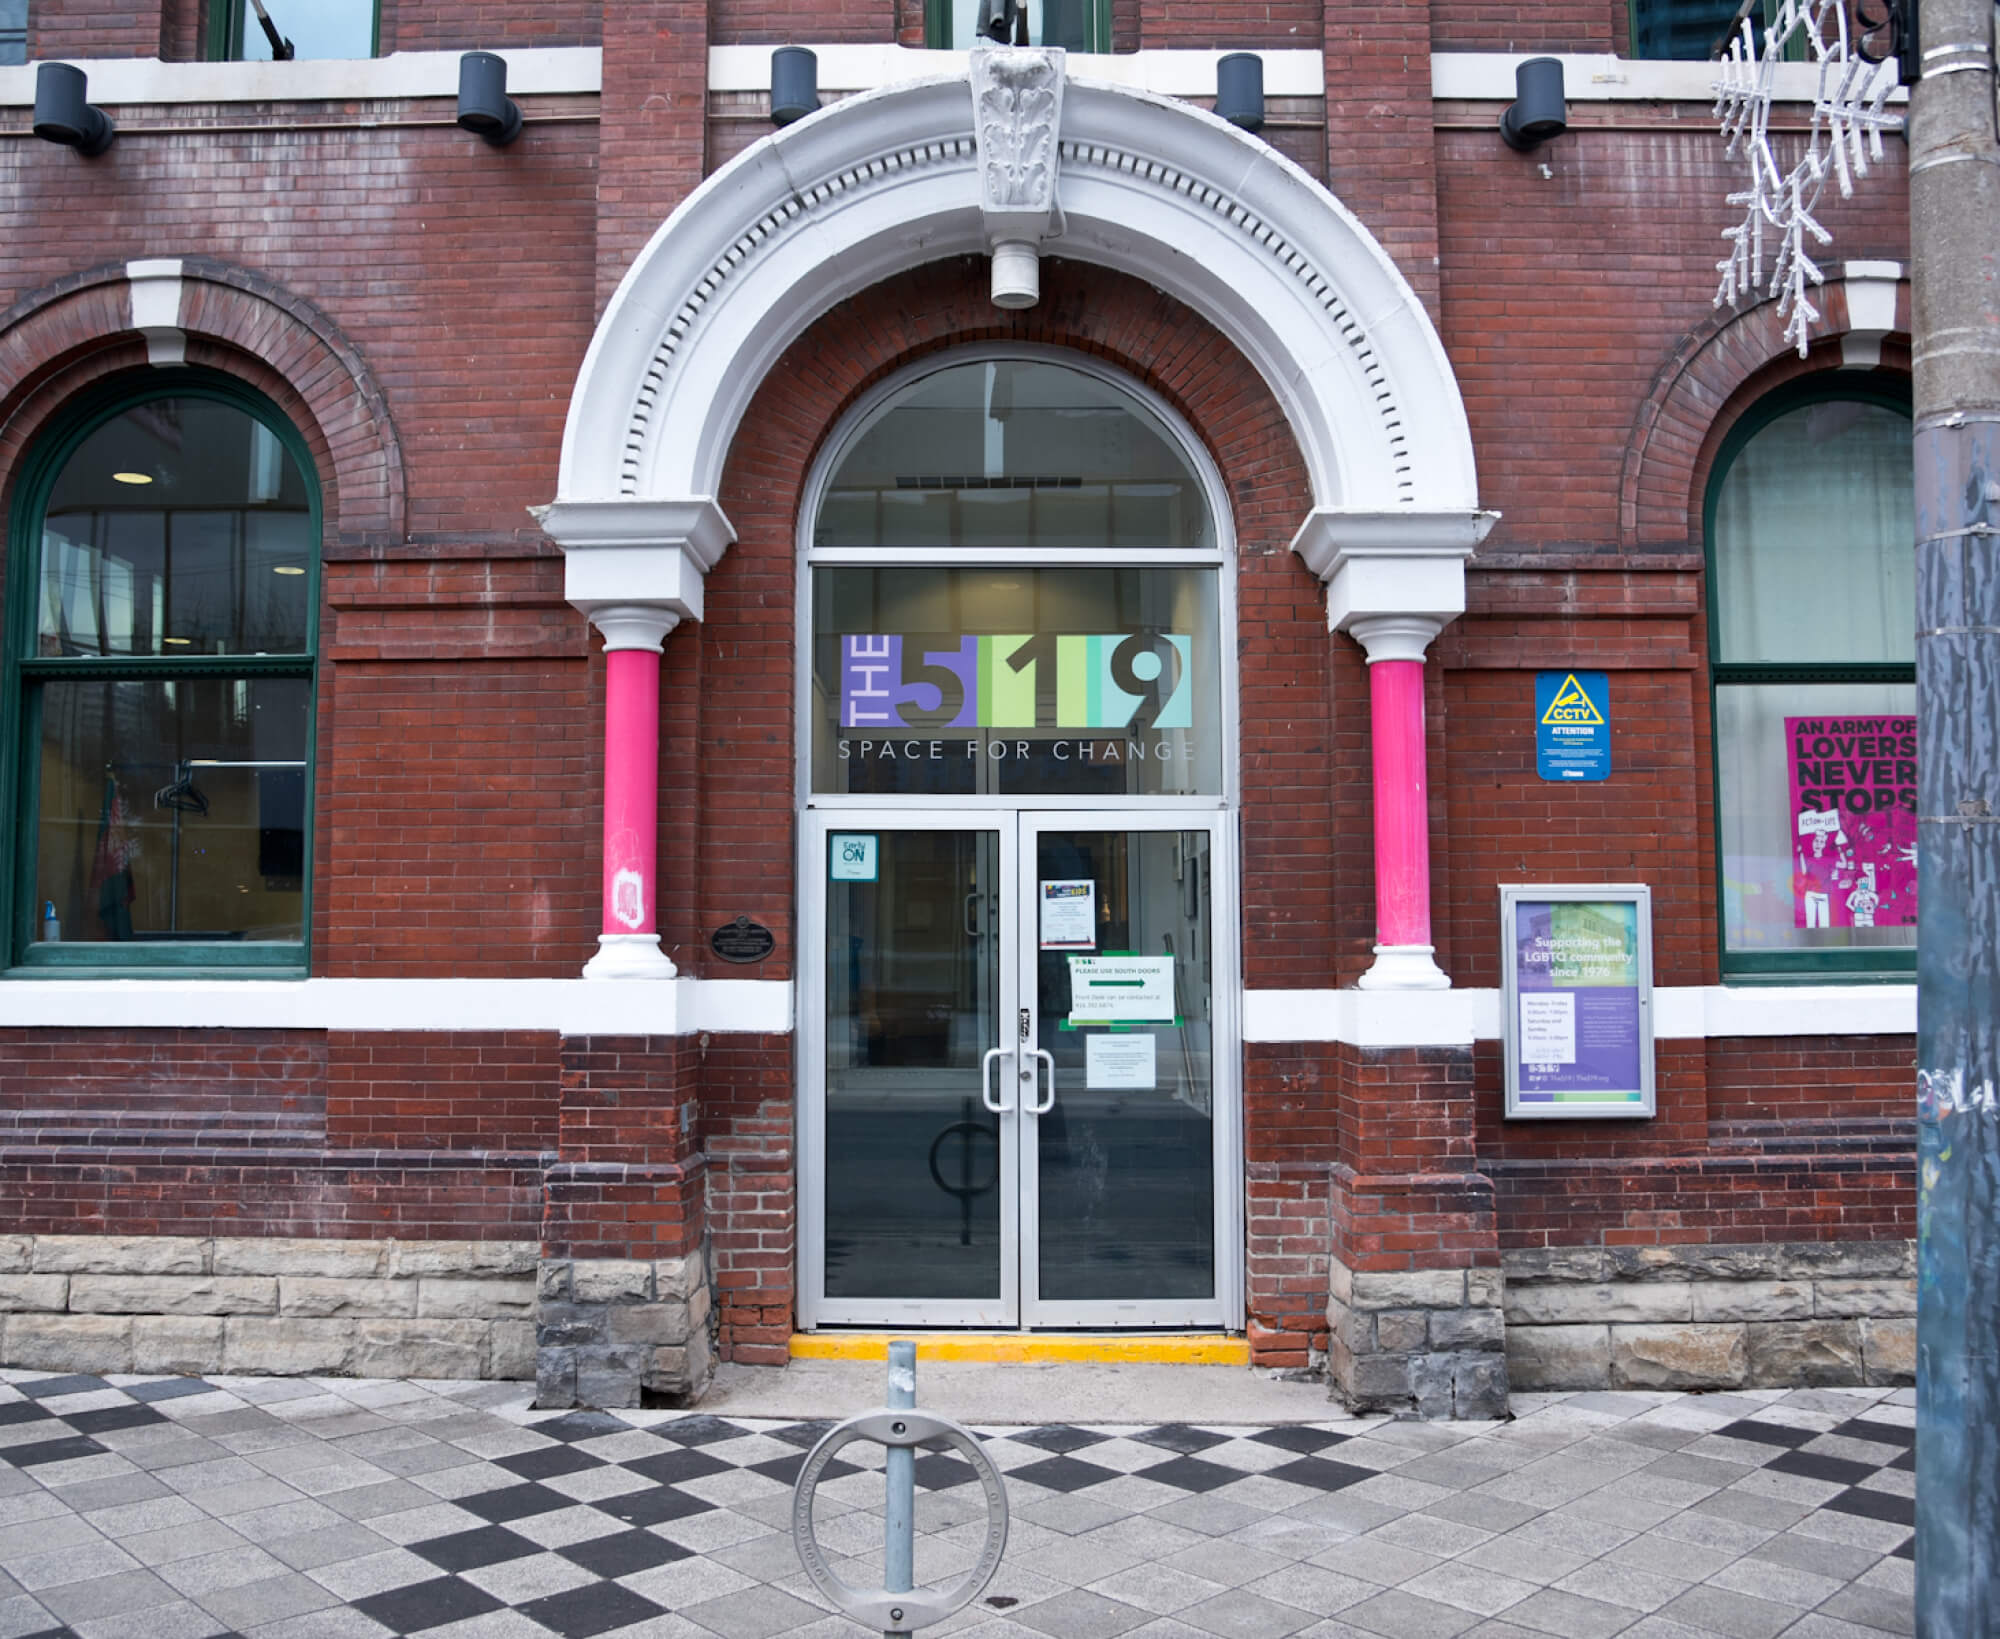 Image of the entryway of a red brick building with white accents. Above the doorway is a decorative white stone arch supported by pink vertical columns mounted on brick plinths.